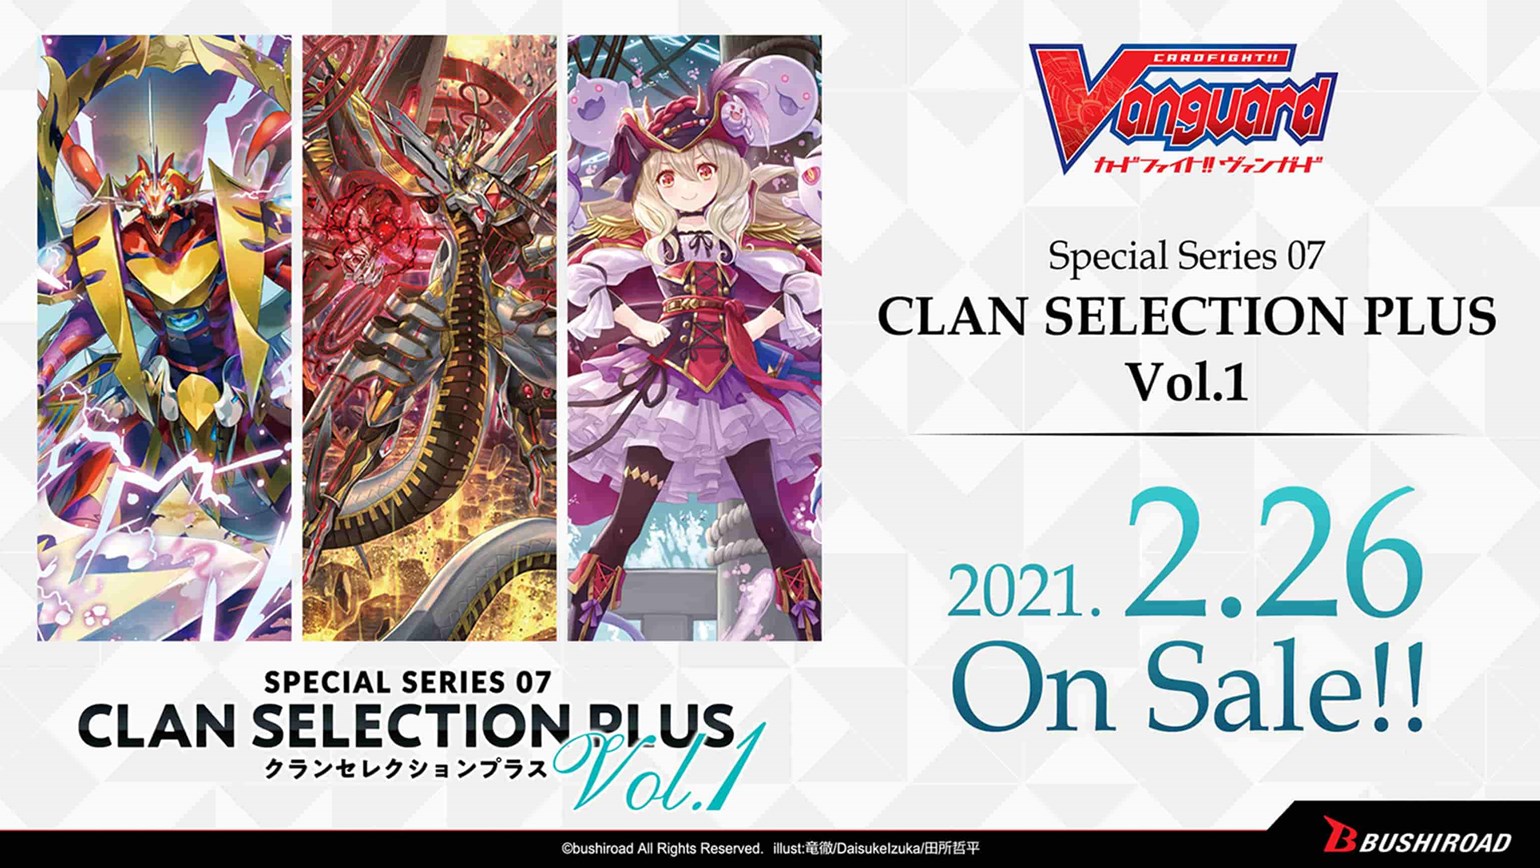 New English Edition Special Series 07 Clan Selection Plus Vol.1 is Coming to Stores on February 26th!